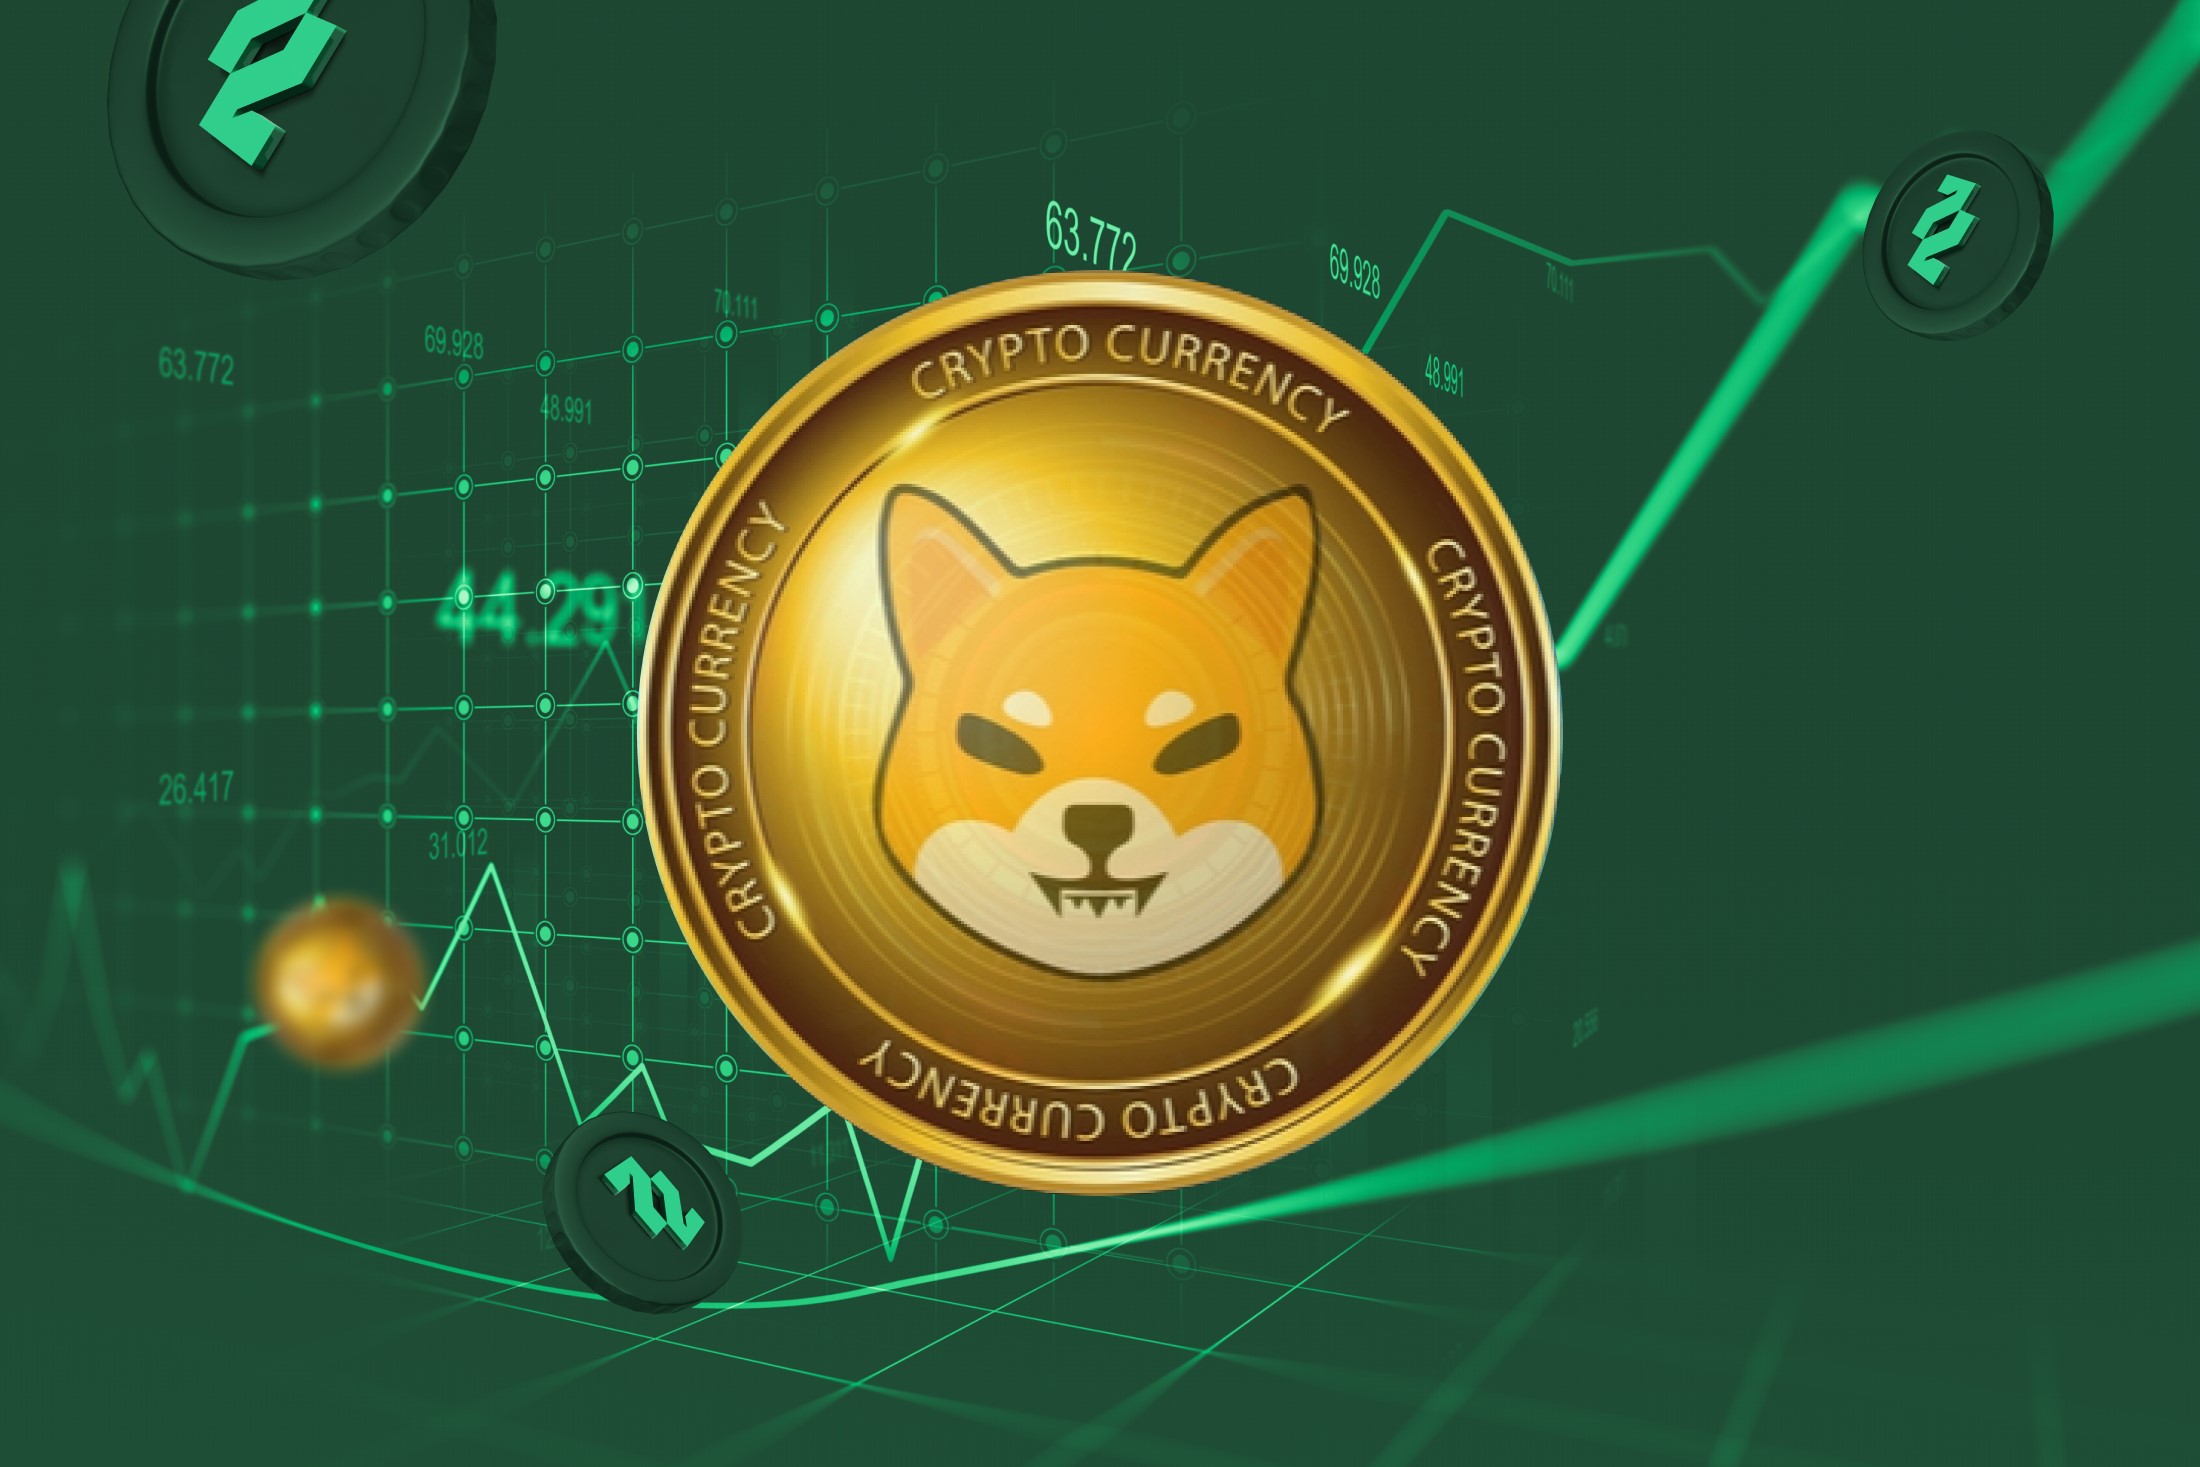 Which Crypto Will Change The Game - Tradecurve (TCRV), Shiba Inu (SHIB), Or ApeCoin (APE)?